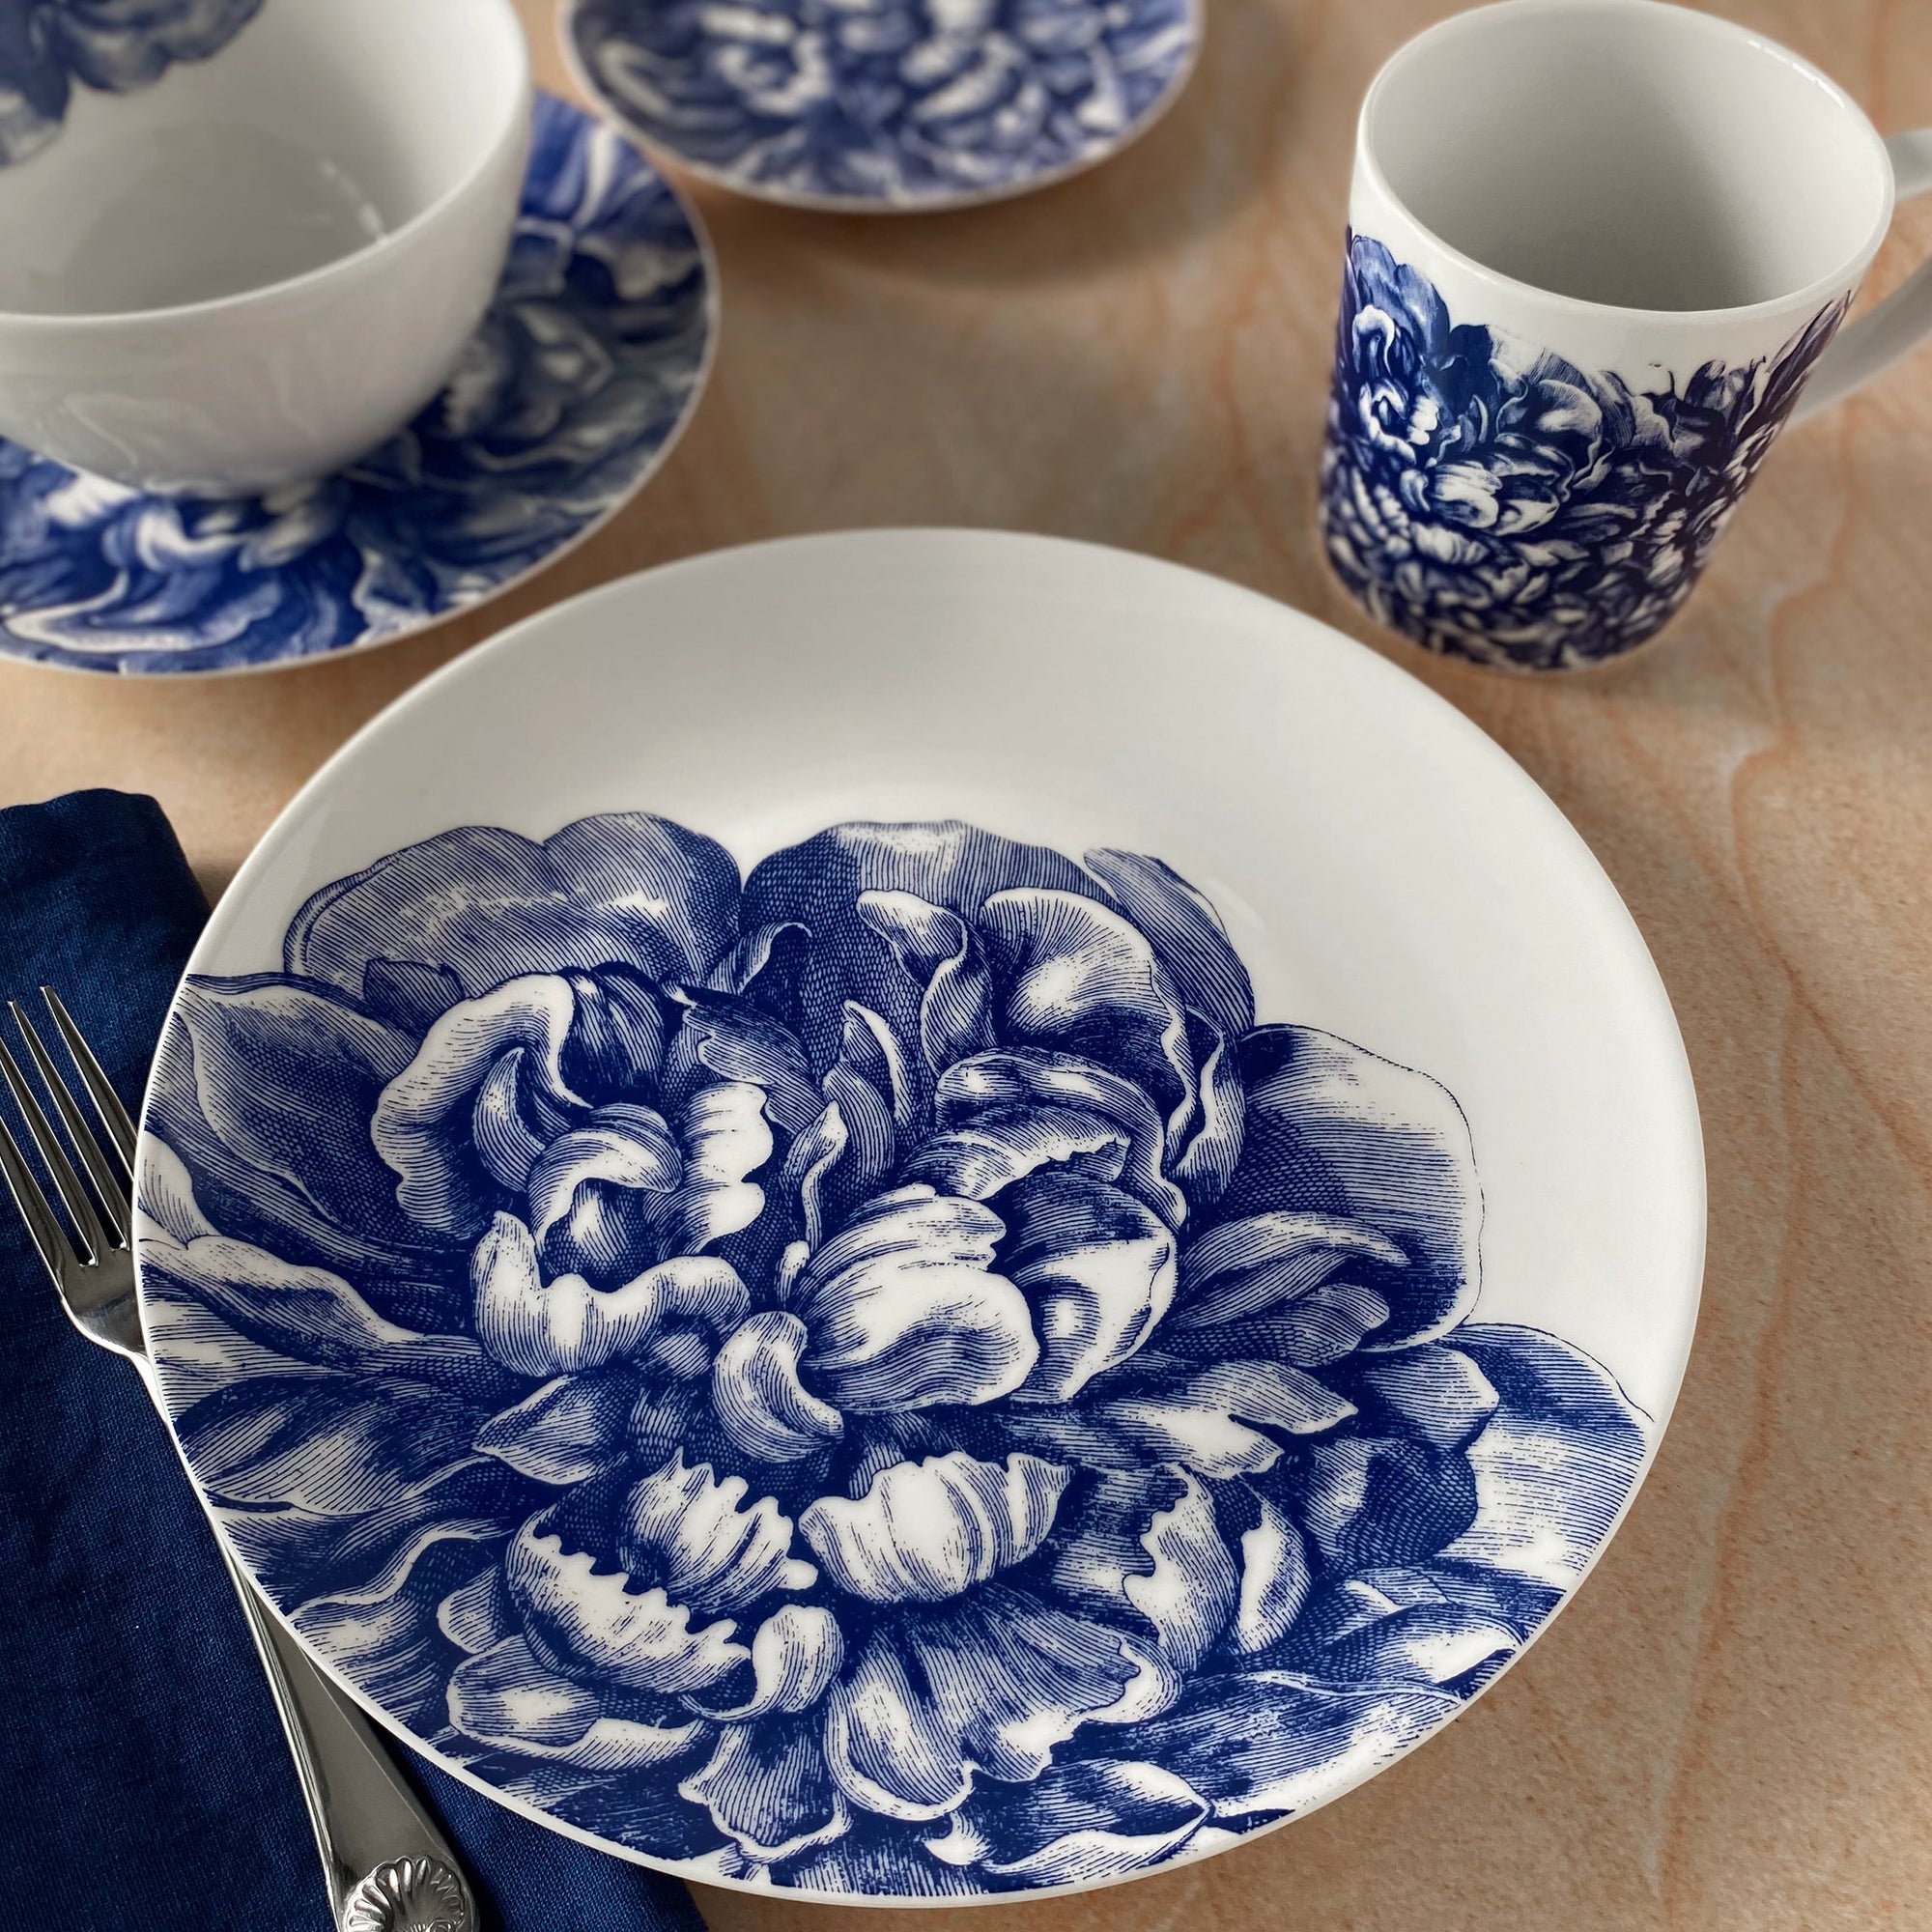 A set of Caskata Artisanal Home Peony 4-Piece Place Setting with a blue floral design, including two plates of different sizes and a small cup, all on a white background.